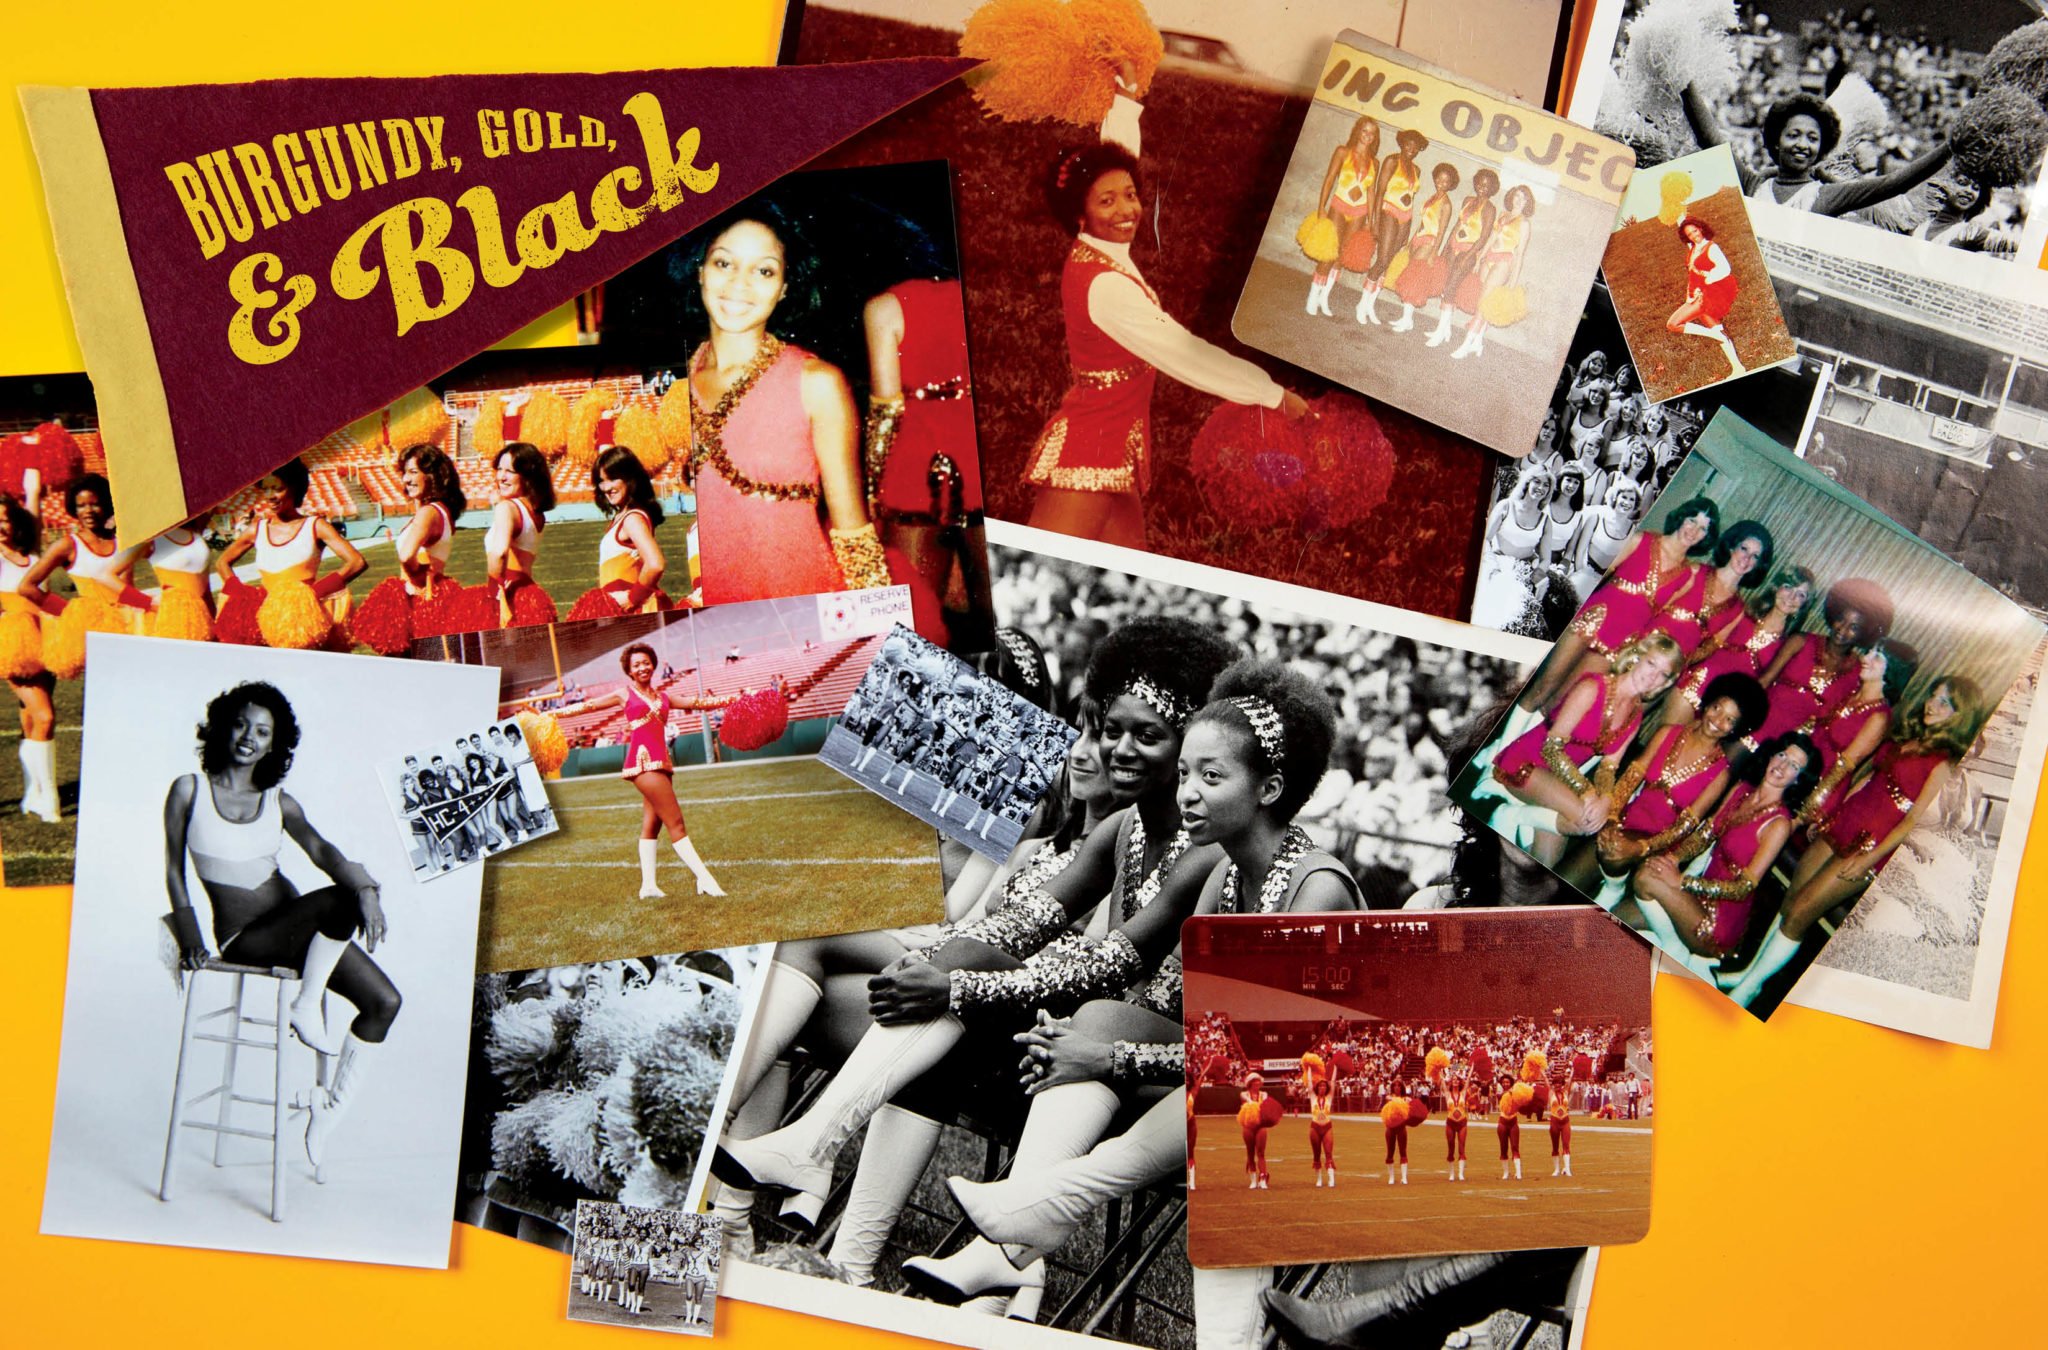 The 12th Man Tradition – Texas Monthly